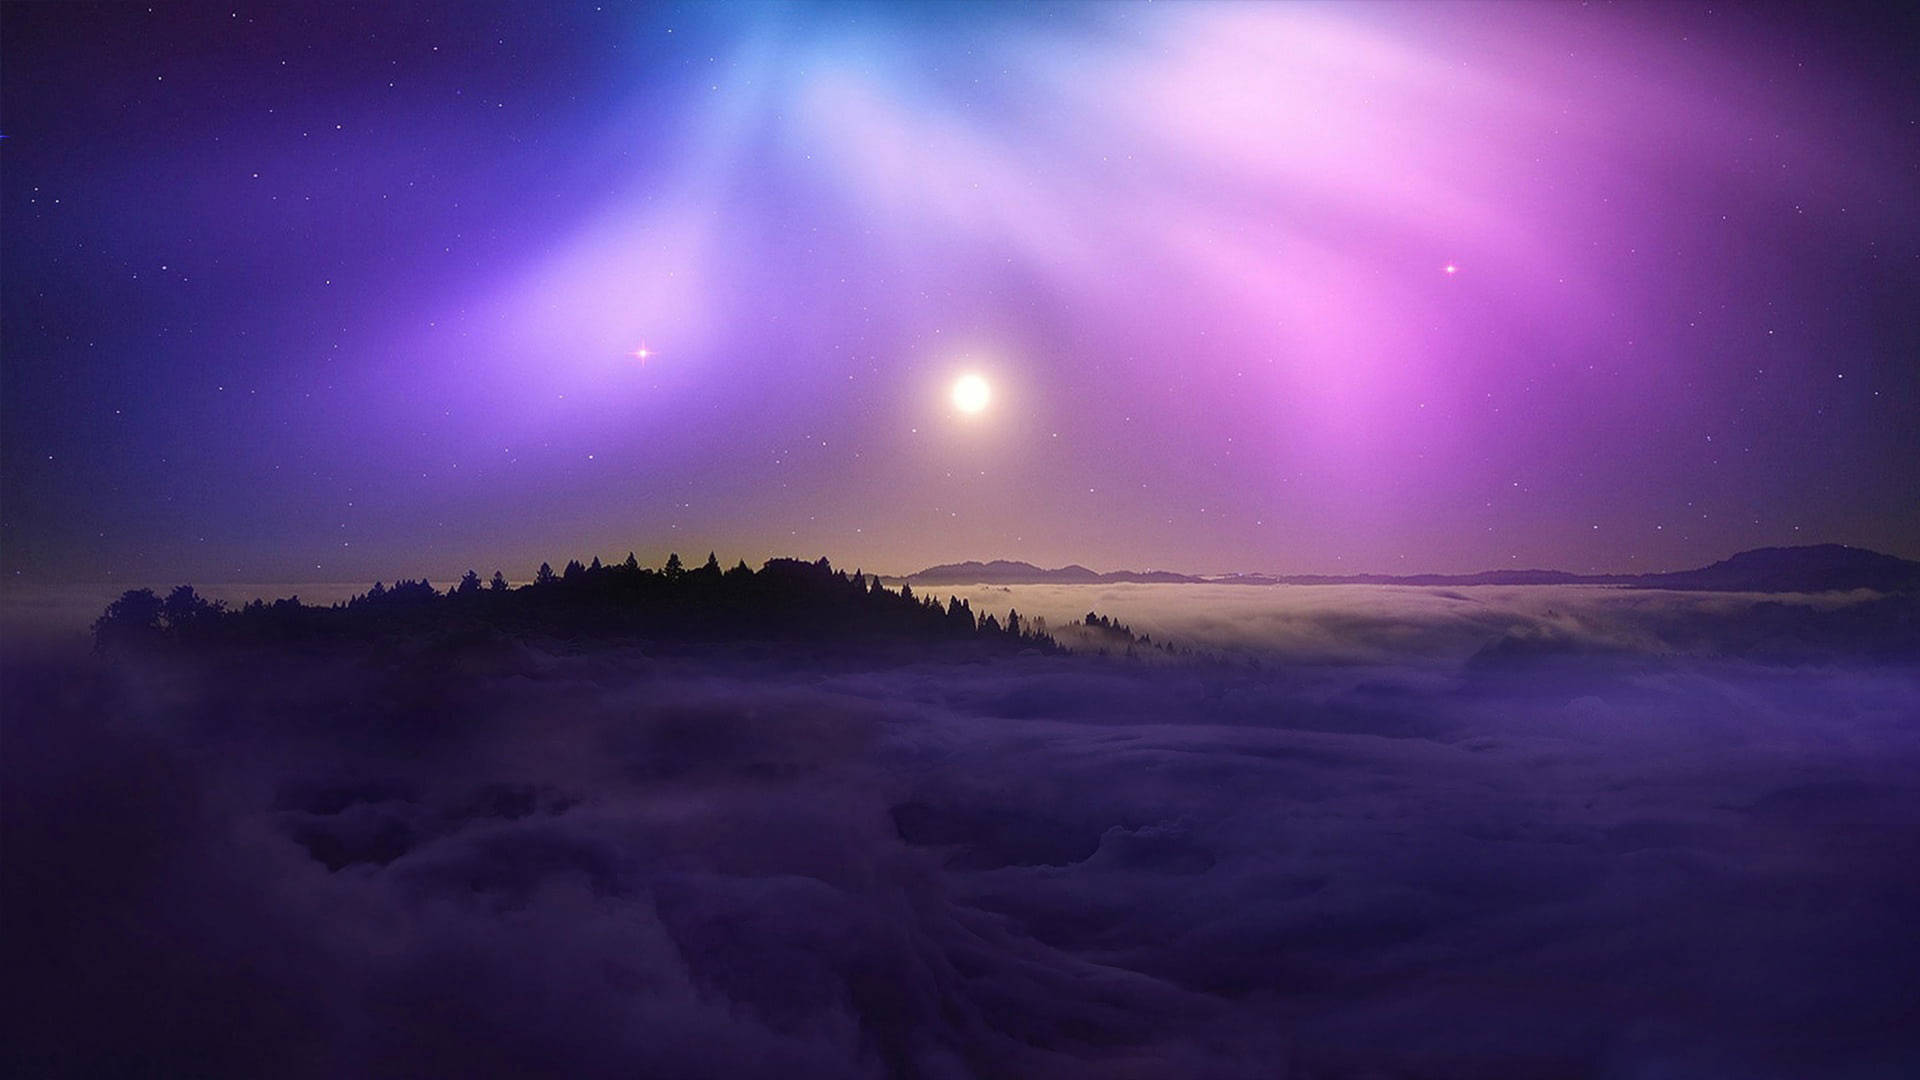 Black And Purple Aesthetic Blanket Of Clouds Background